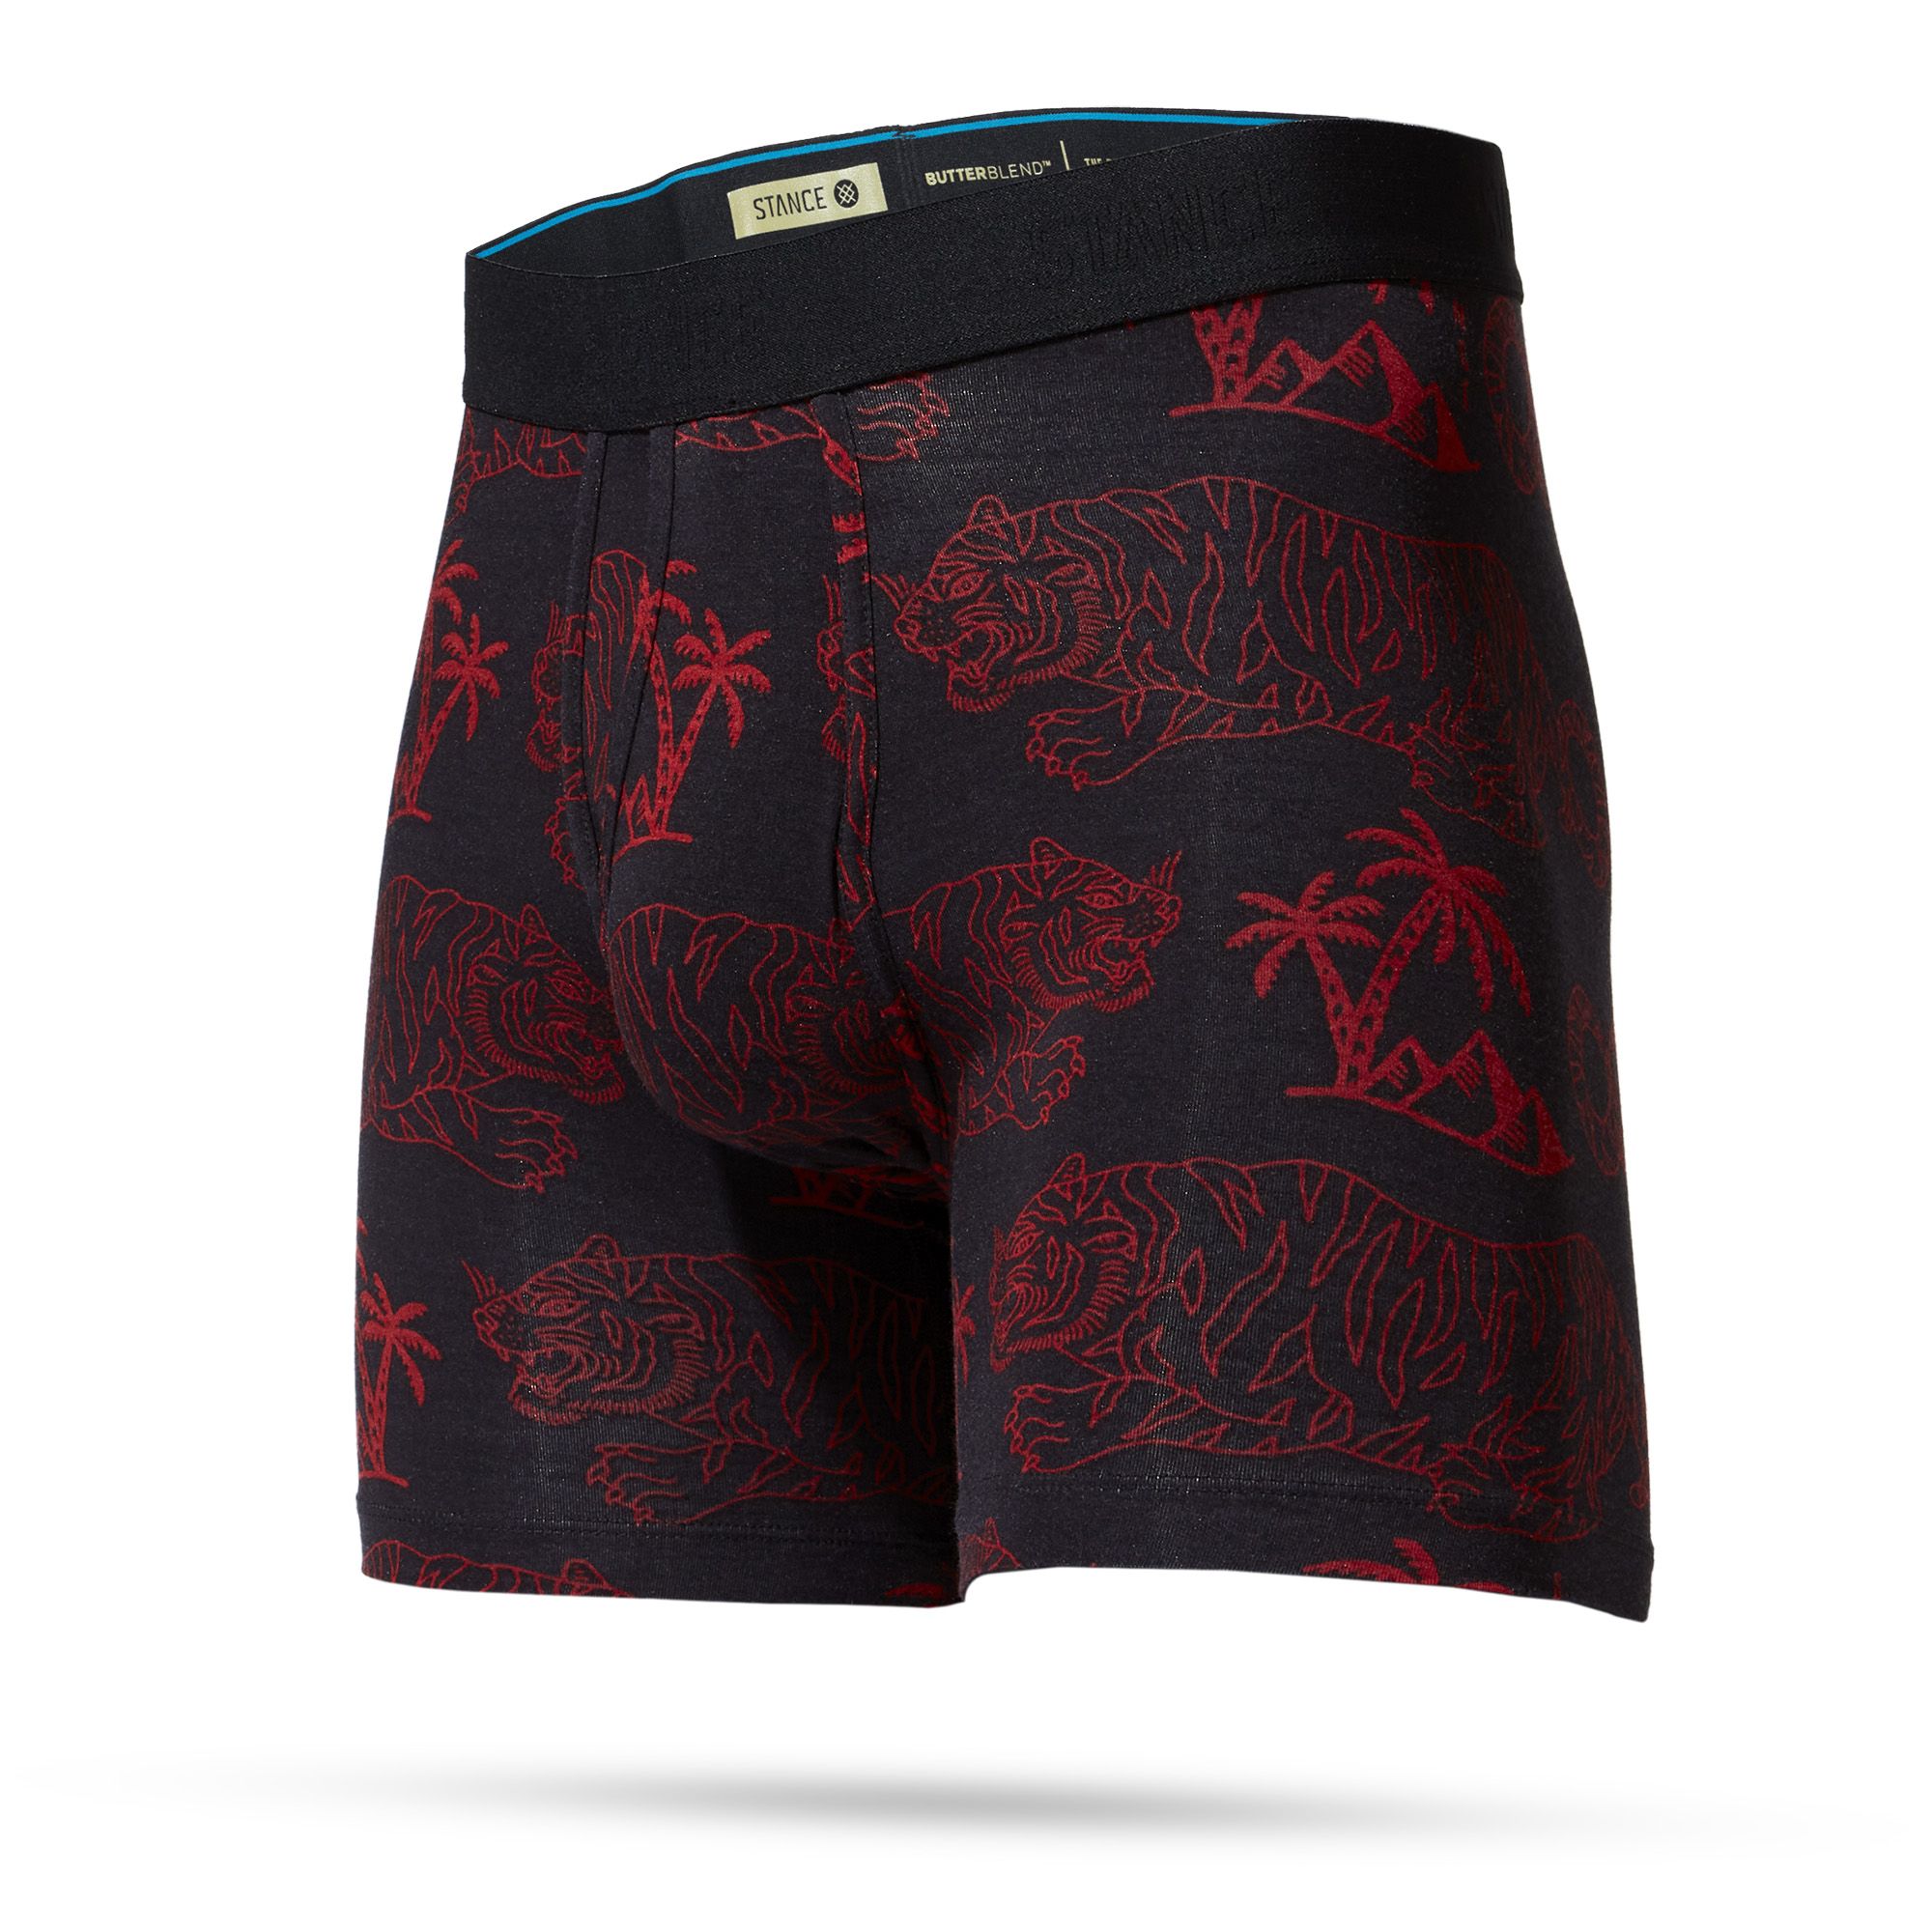 Stance Swankidays Wholester Boxers Army men